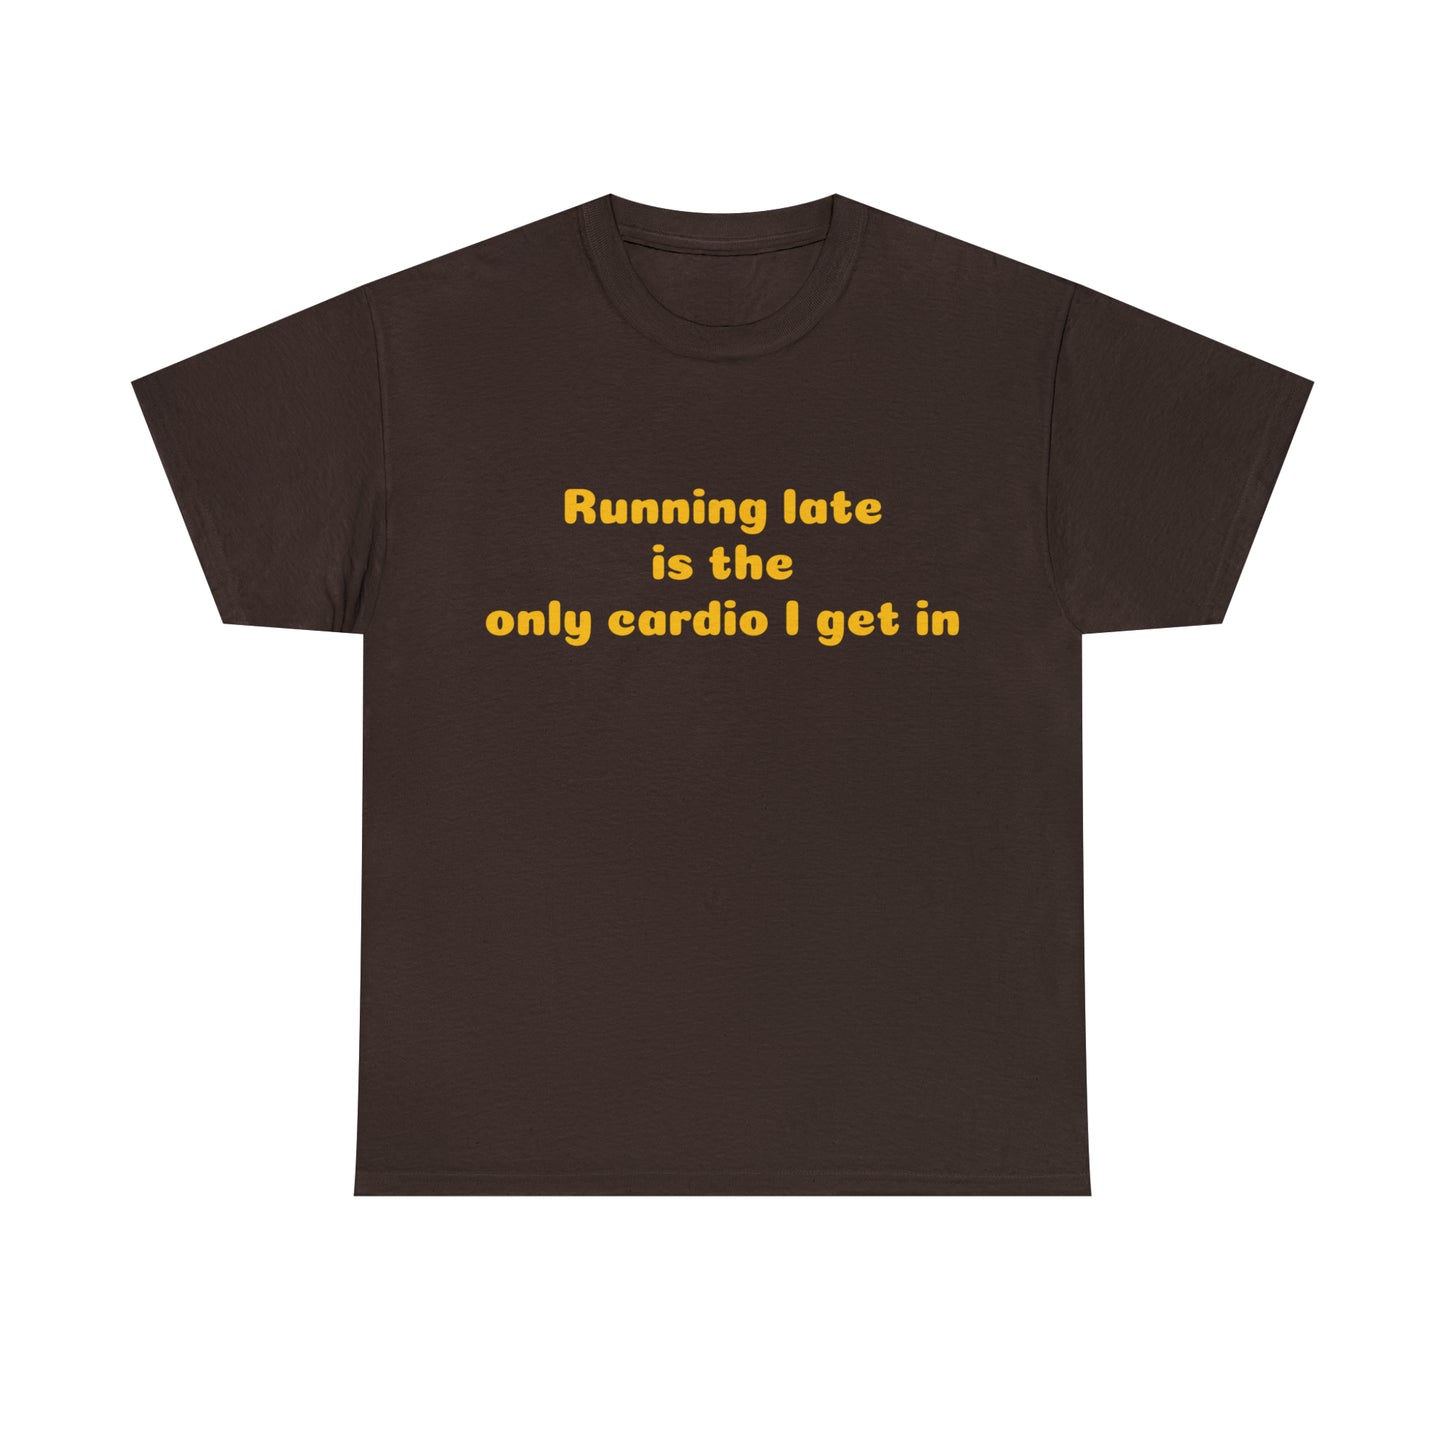 Custom Parody T-shirt, Running late is the only cardio I get in shirt design